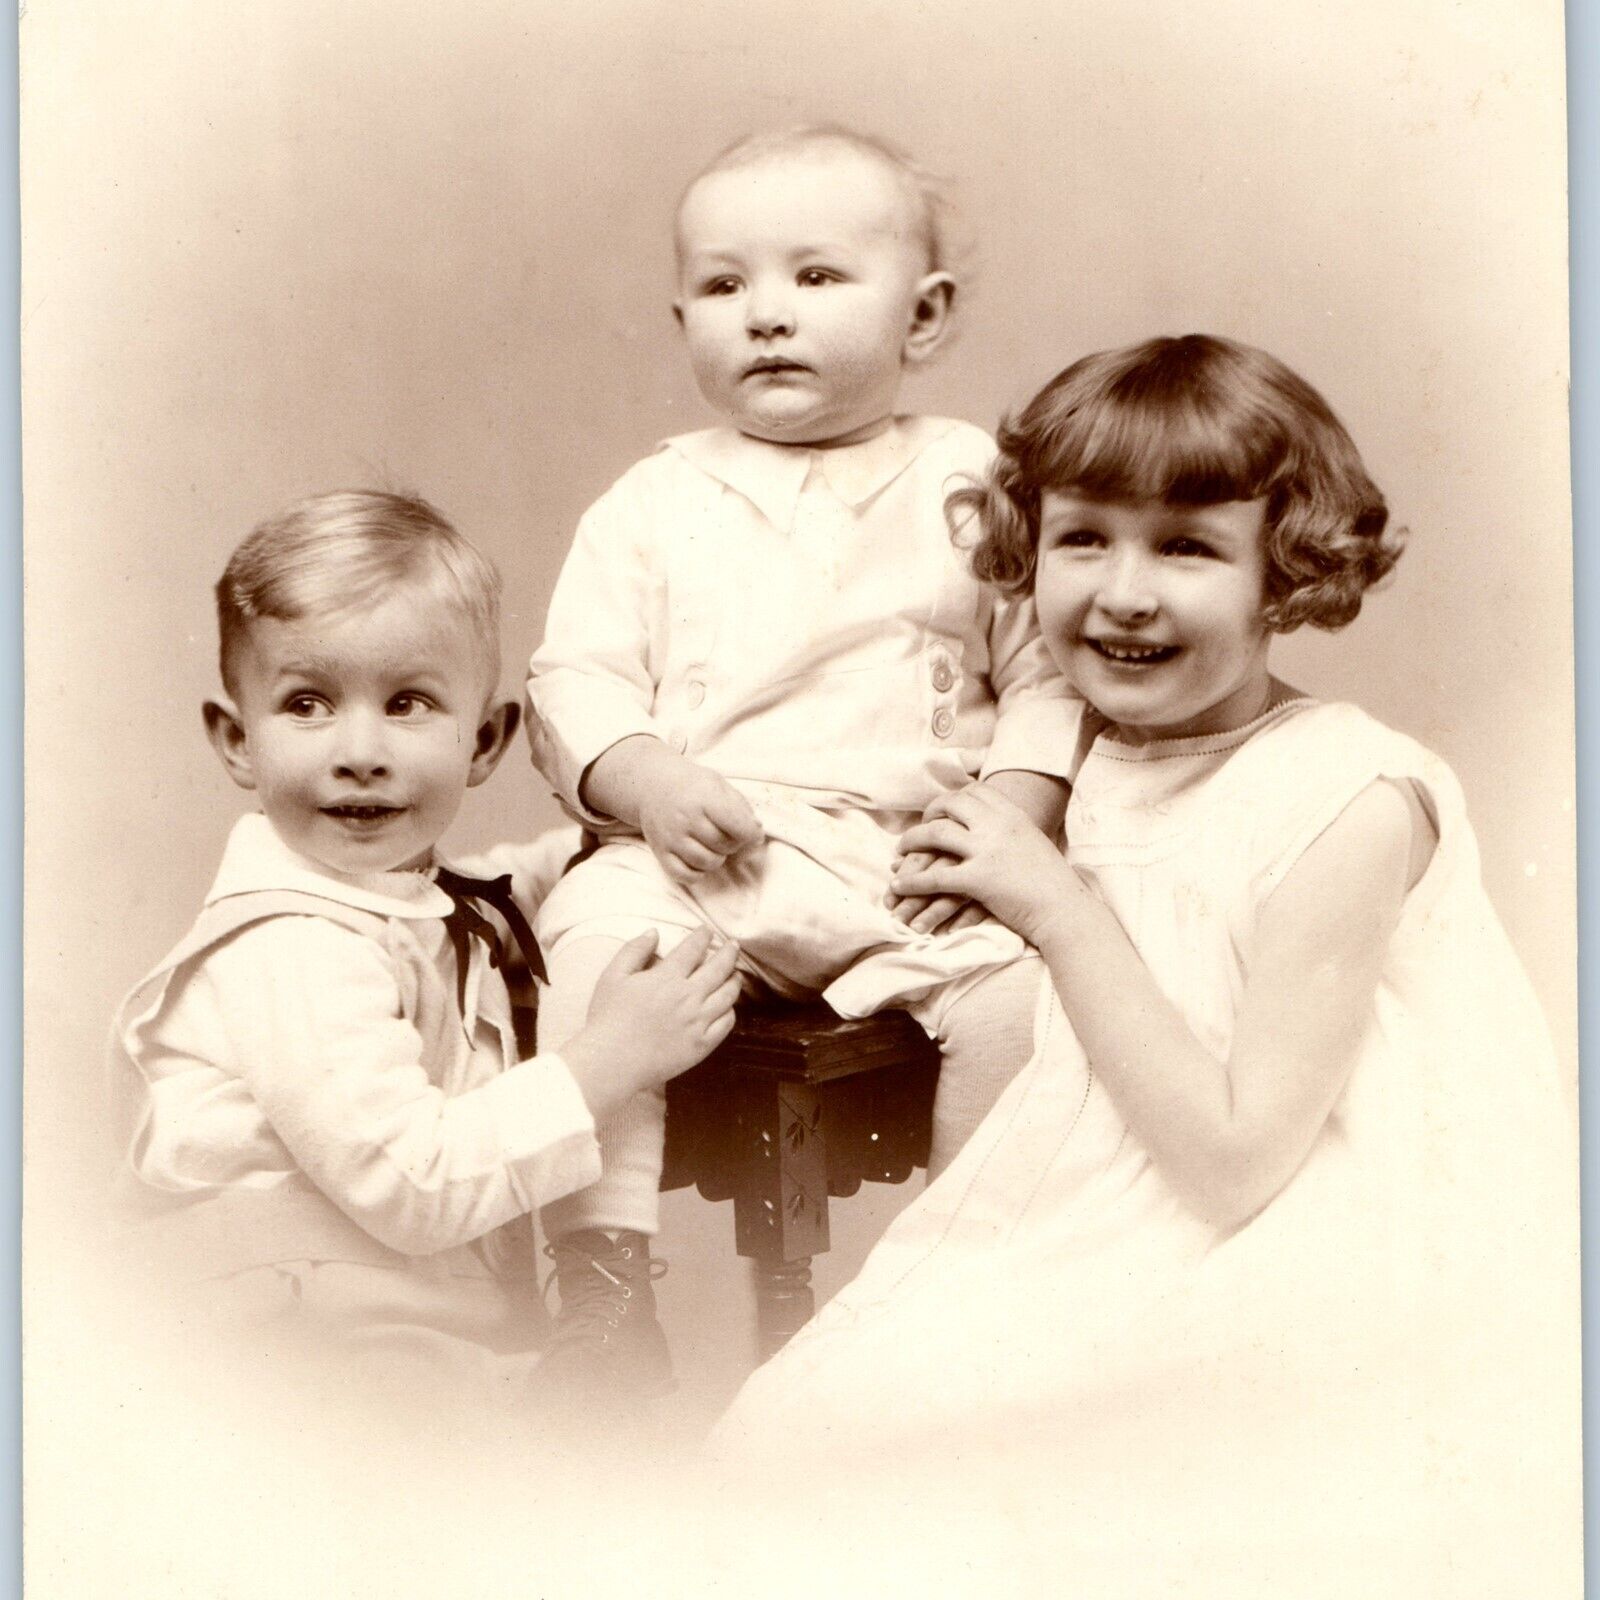 c1920s Adorable Group Siblings Boy Girl Baby Smile Portrait Real Photo Cute 5O